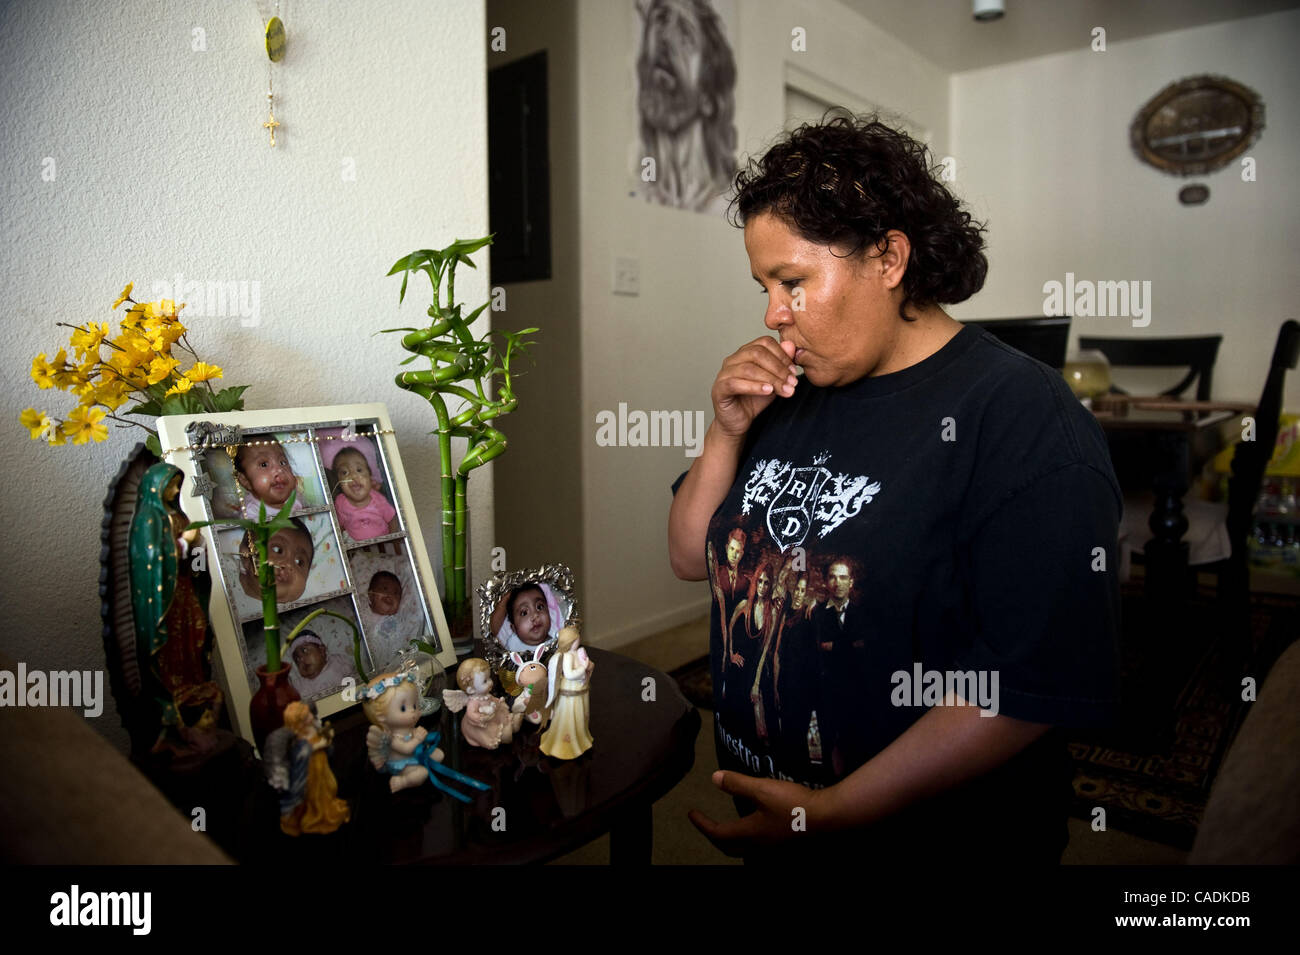 Aug 03, 2010 - Sacramento, California, U.S. - Maria Sualeto prays over a small shrine to her late daughter Ashley in her Avenal, Calif home. Sauleto gave birth to Ashley while living in Kettleman City. The infant was born with multiple birth defects, including cleft lip and palate, holes in her hear Stock Photo